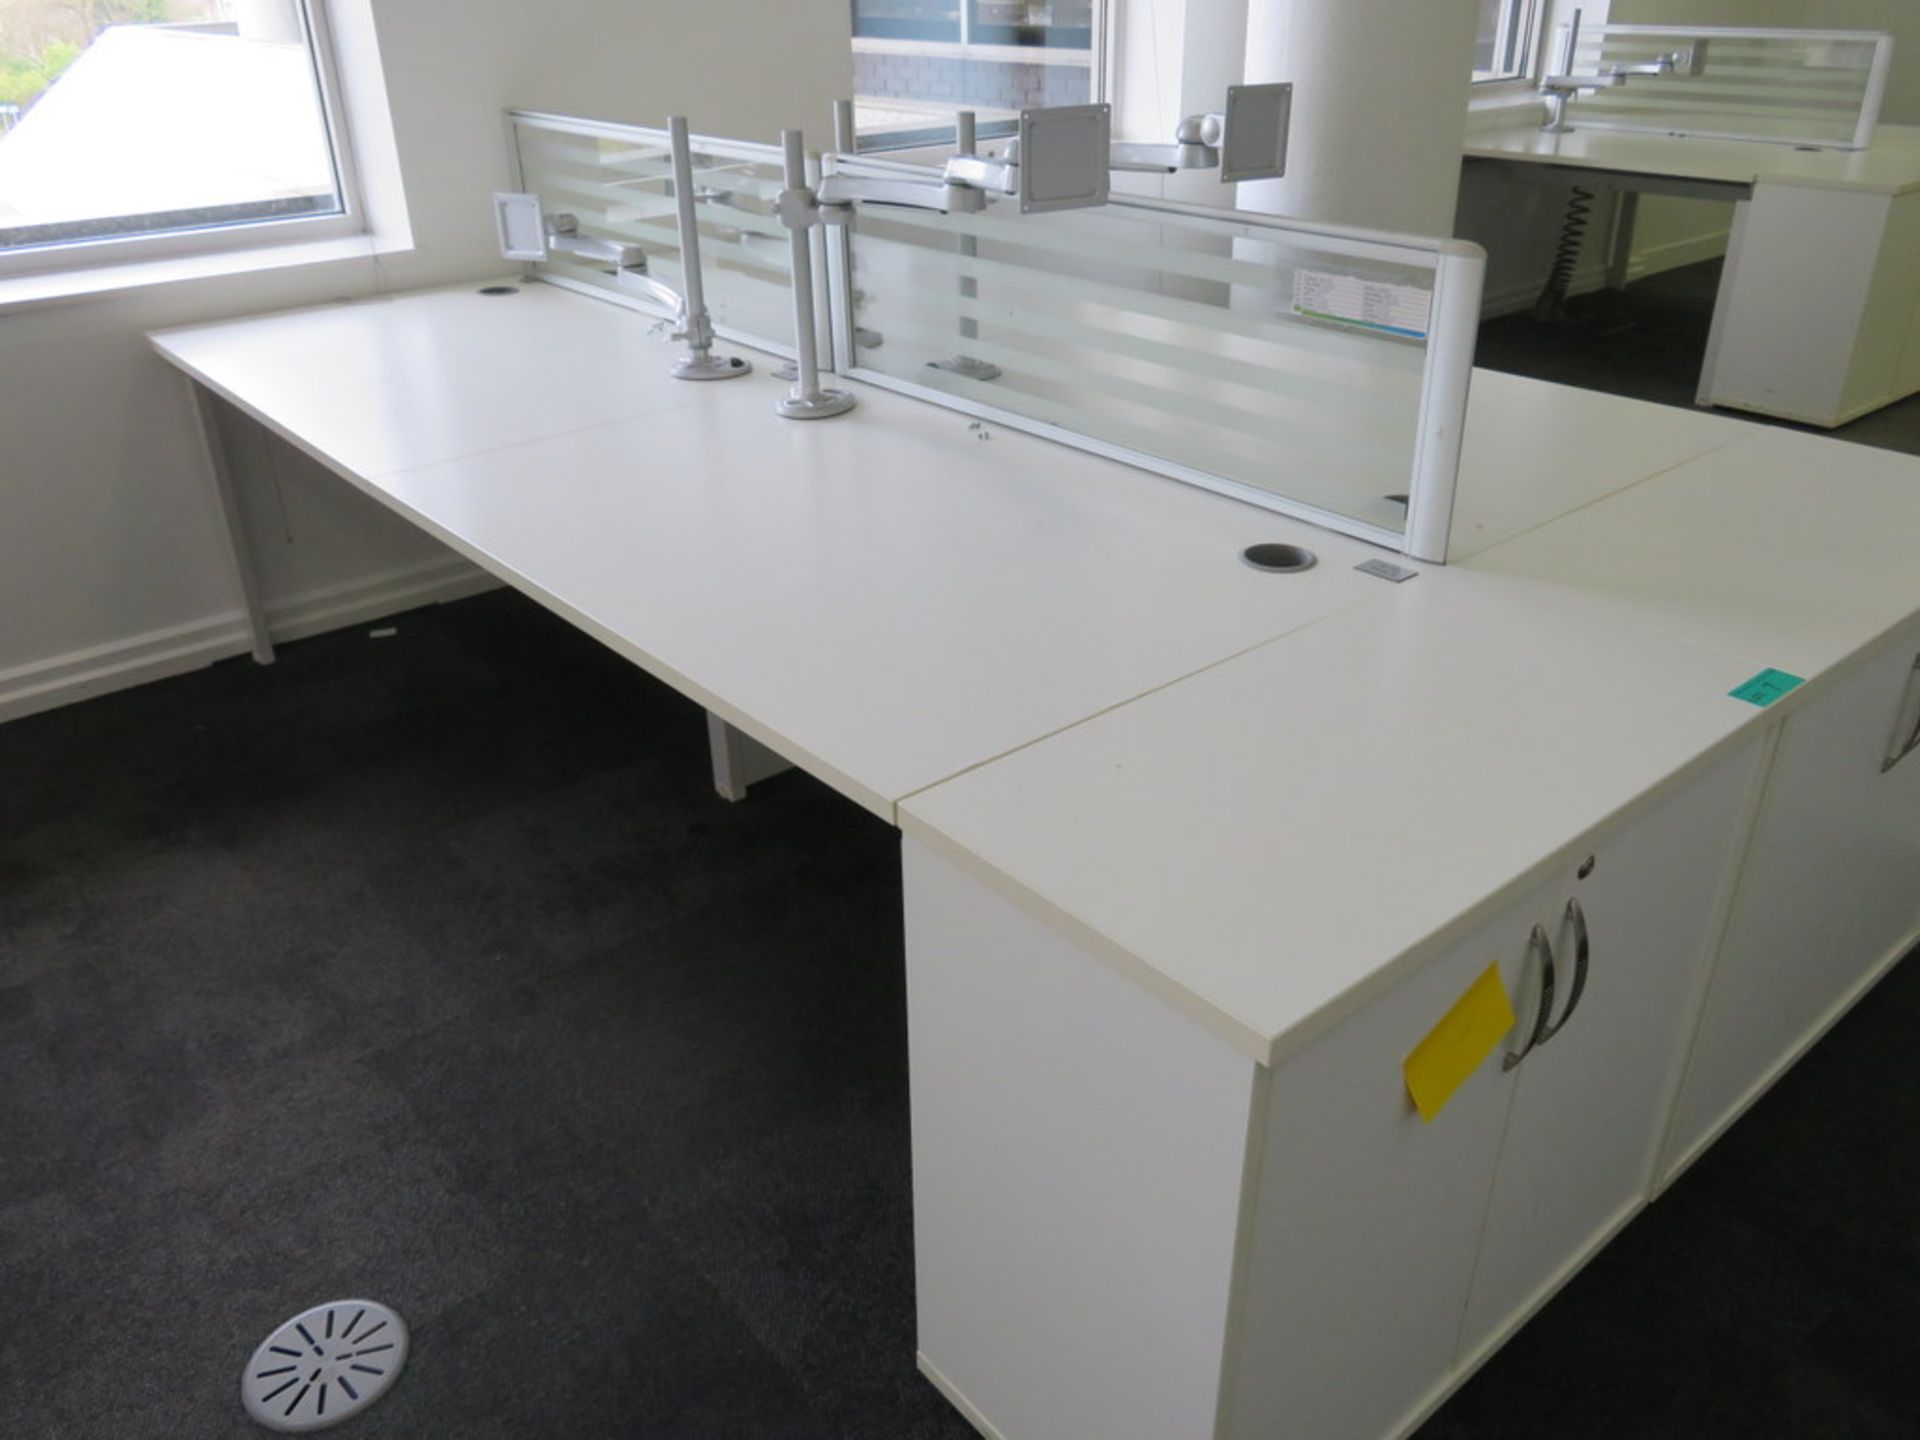 4 Person Desk Arrangement With Dividers, Monitor Arms & Storage Cupboards. - Image 3 of 3